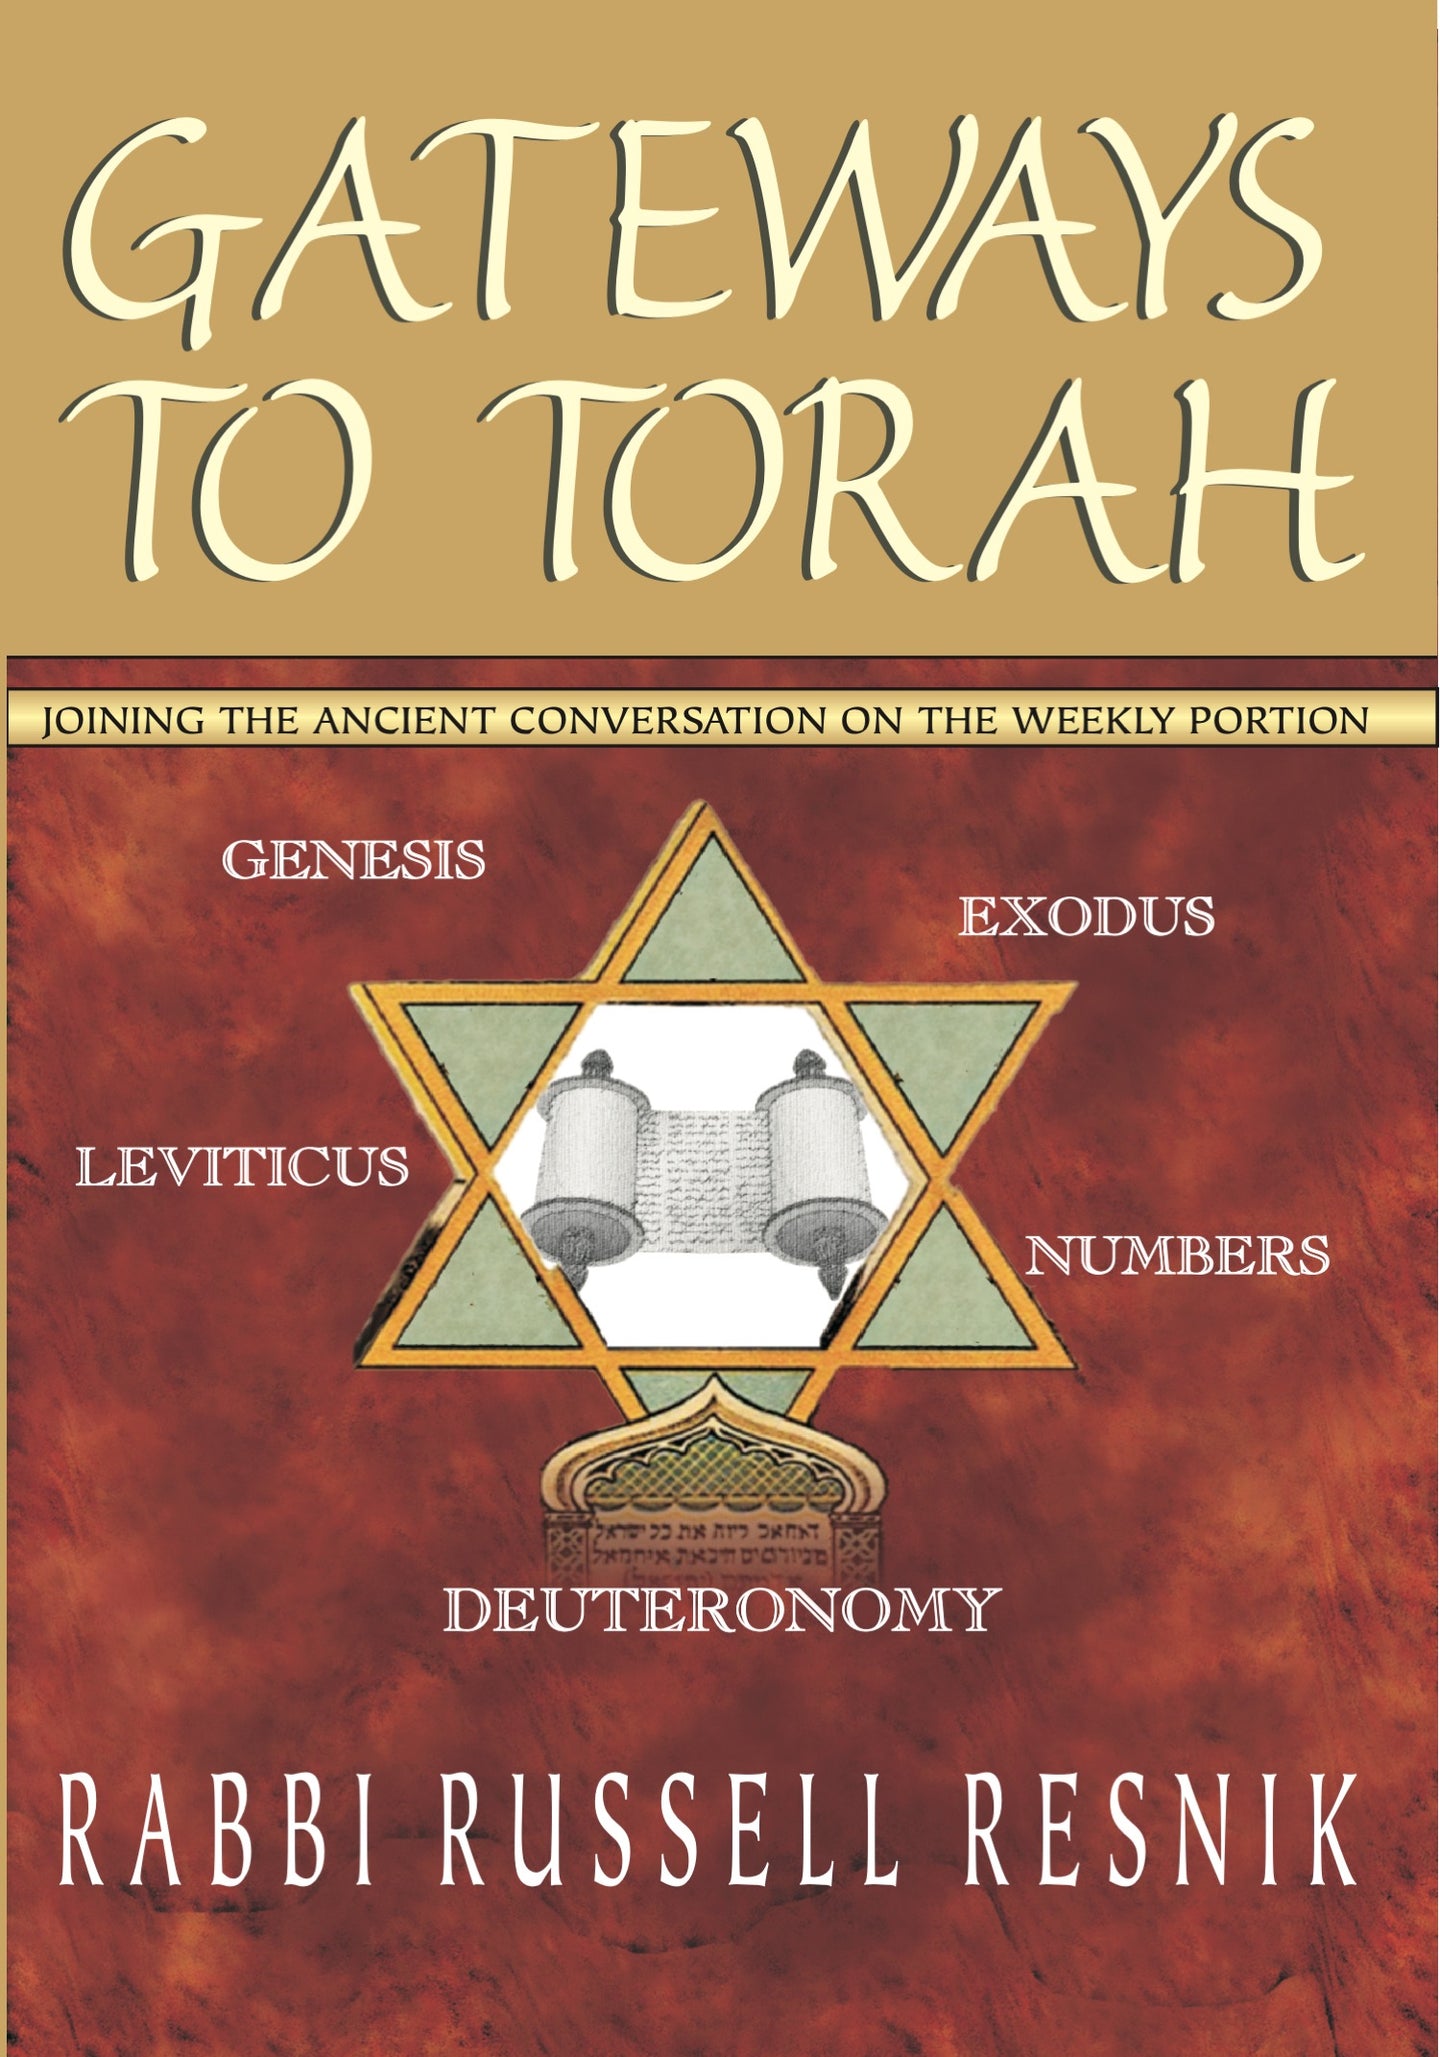 Gateways to Torah: Joining the Ancient Conversation on the Weekly Portion by Rabbi Russell Resnik